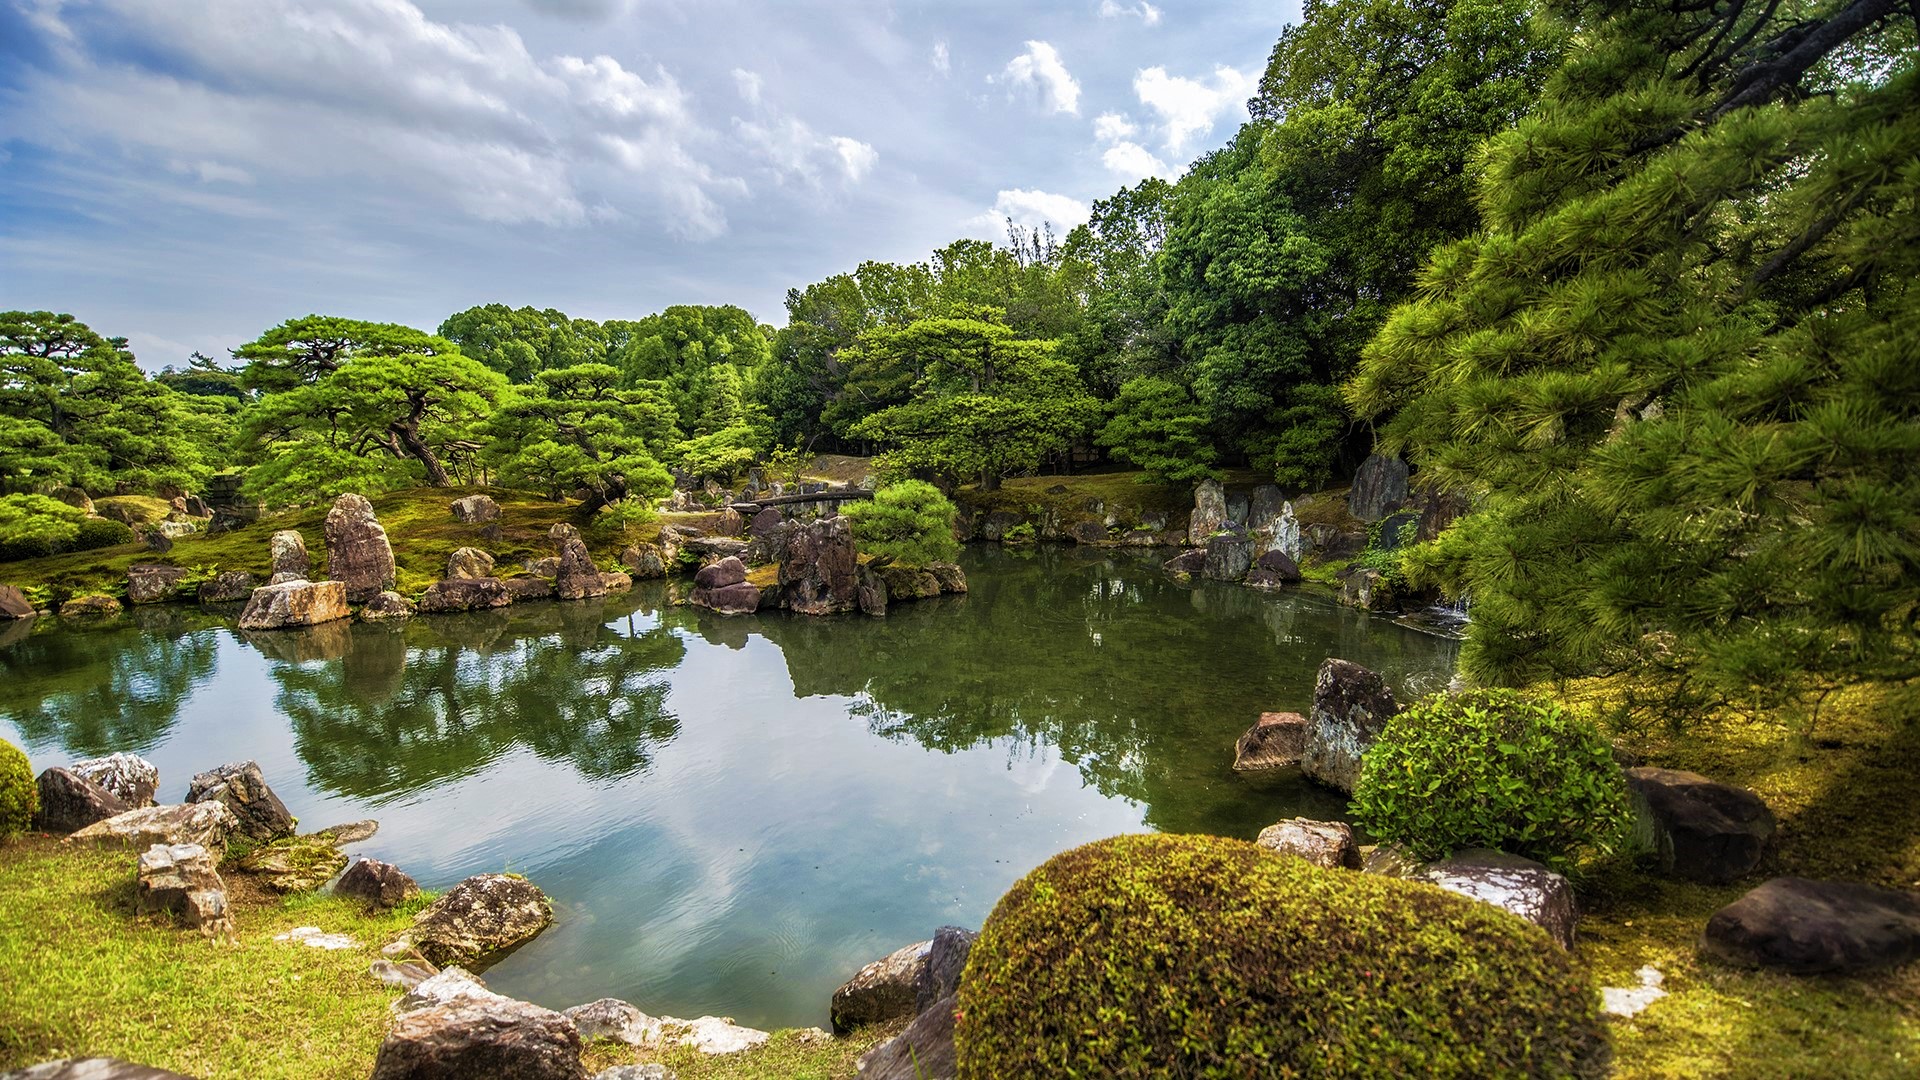 General 1920x1080 nature landscape trees plants rocks water water ripples clouds sky grass pond garden Kyoto Japan bonsai Asia reflection